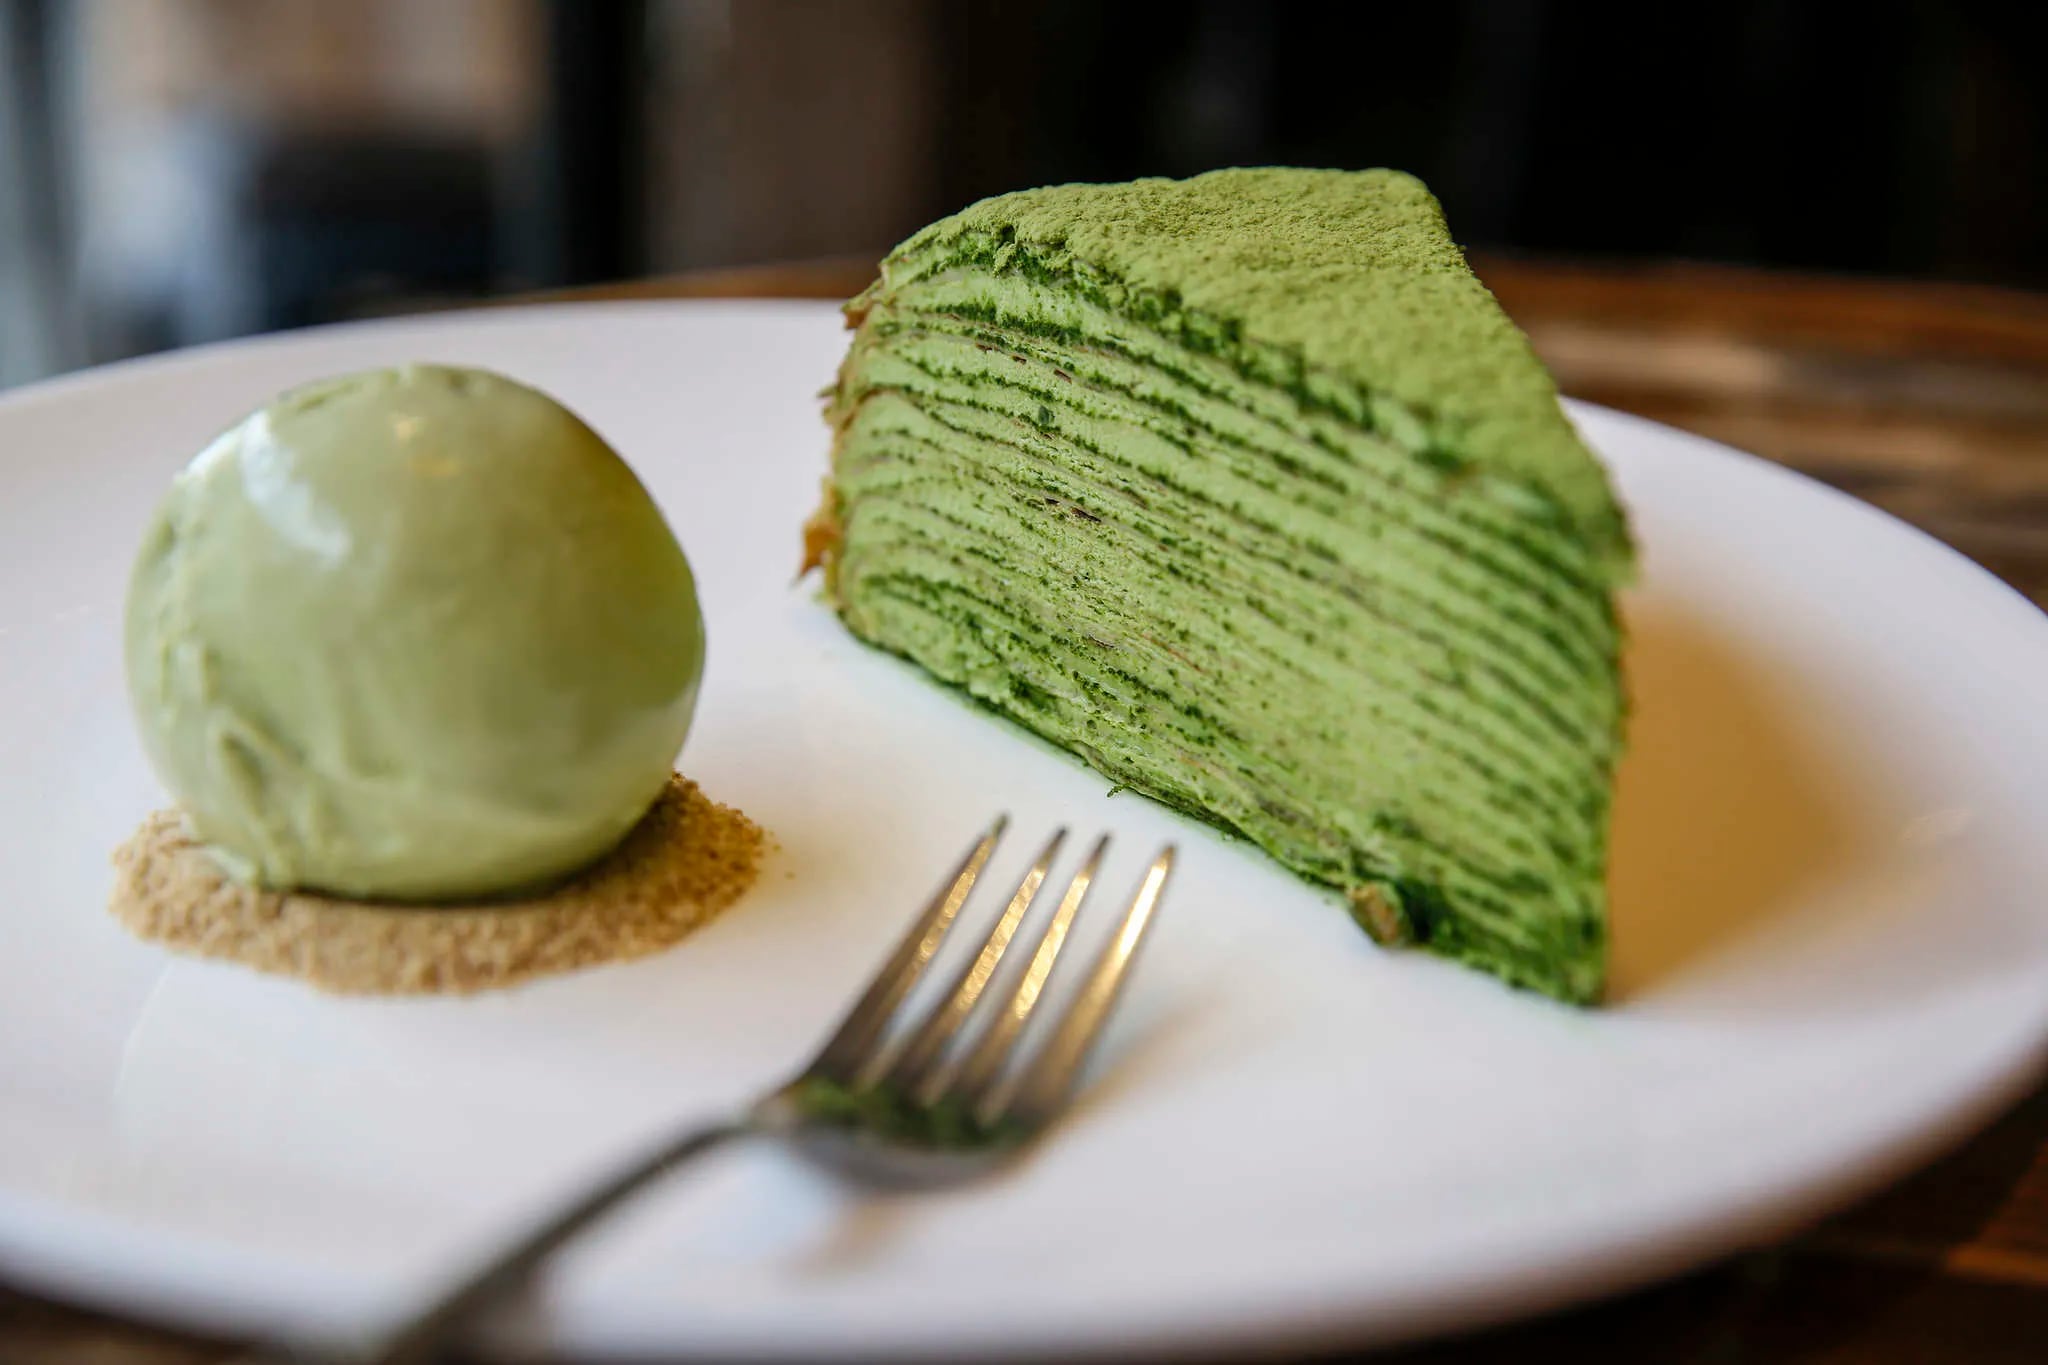 The Matcha Mille Crepe with a scoop of green tea ice cream at Anna Chen�s A La Mousse bakery in Chinatown.